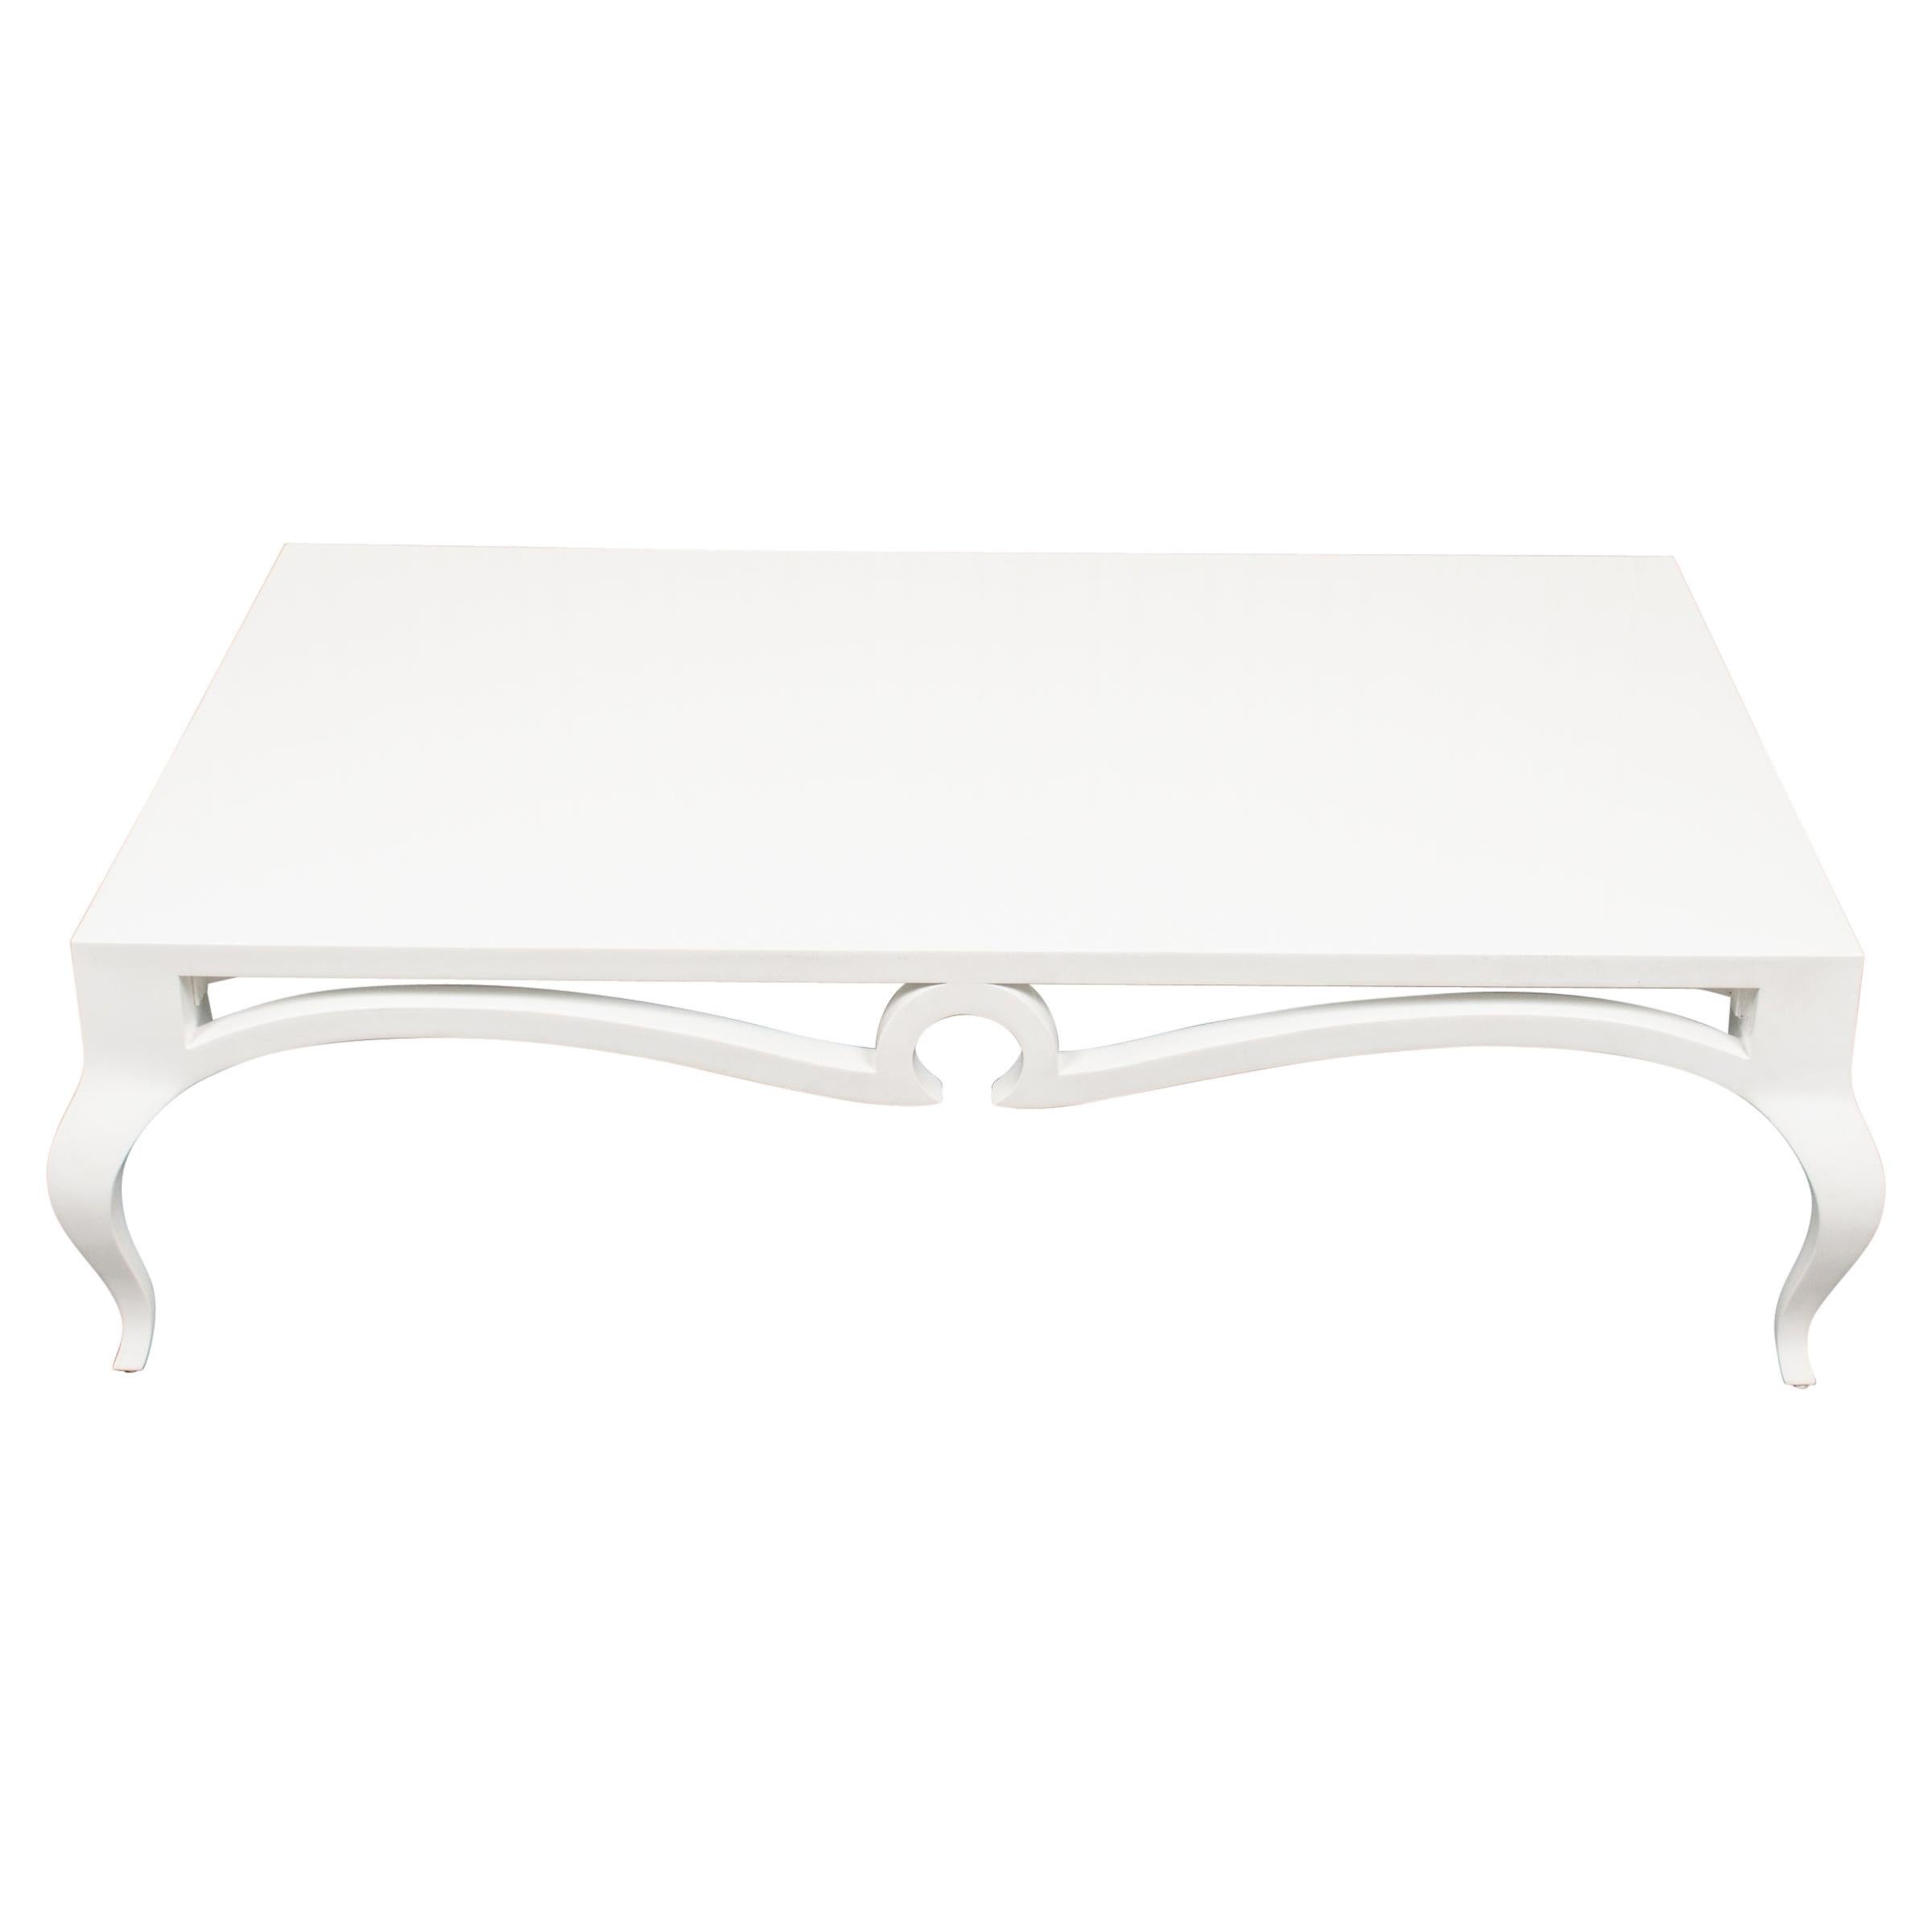 Christopher Guy Modern White Lacquered Coffee Table